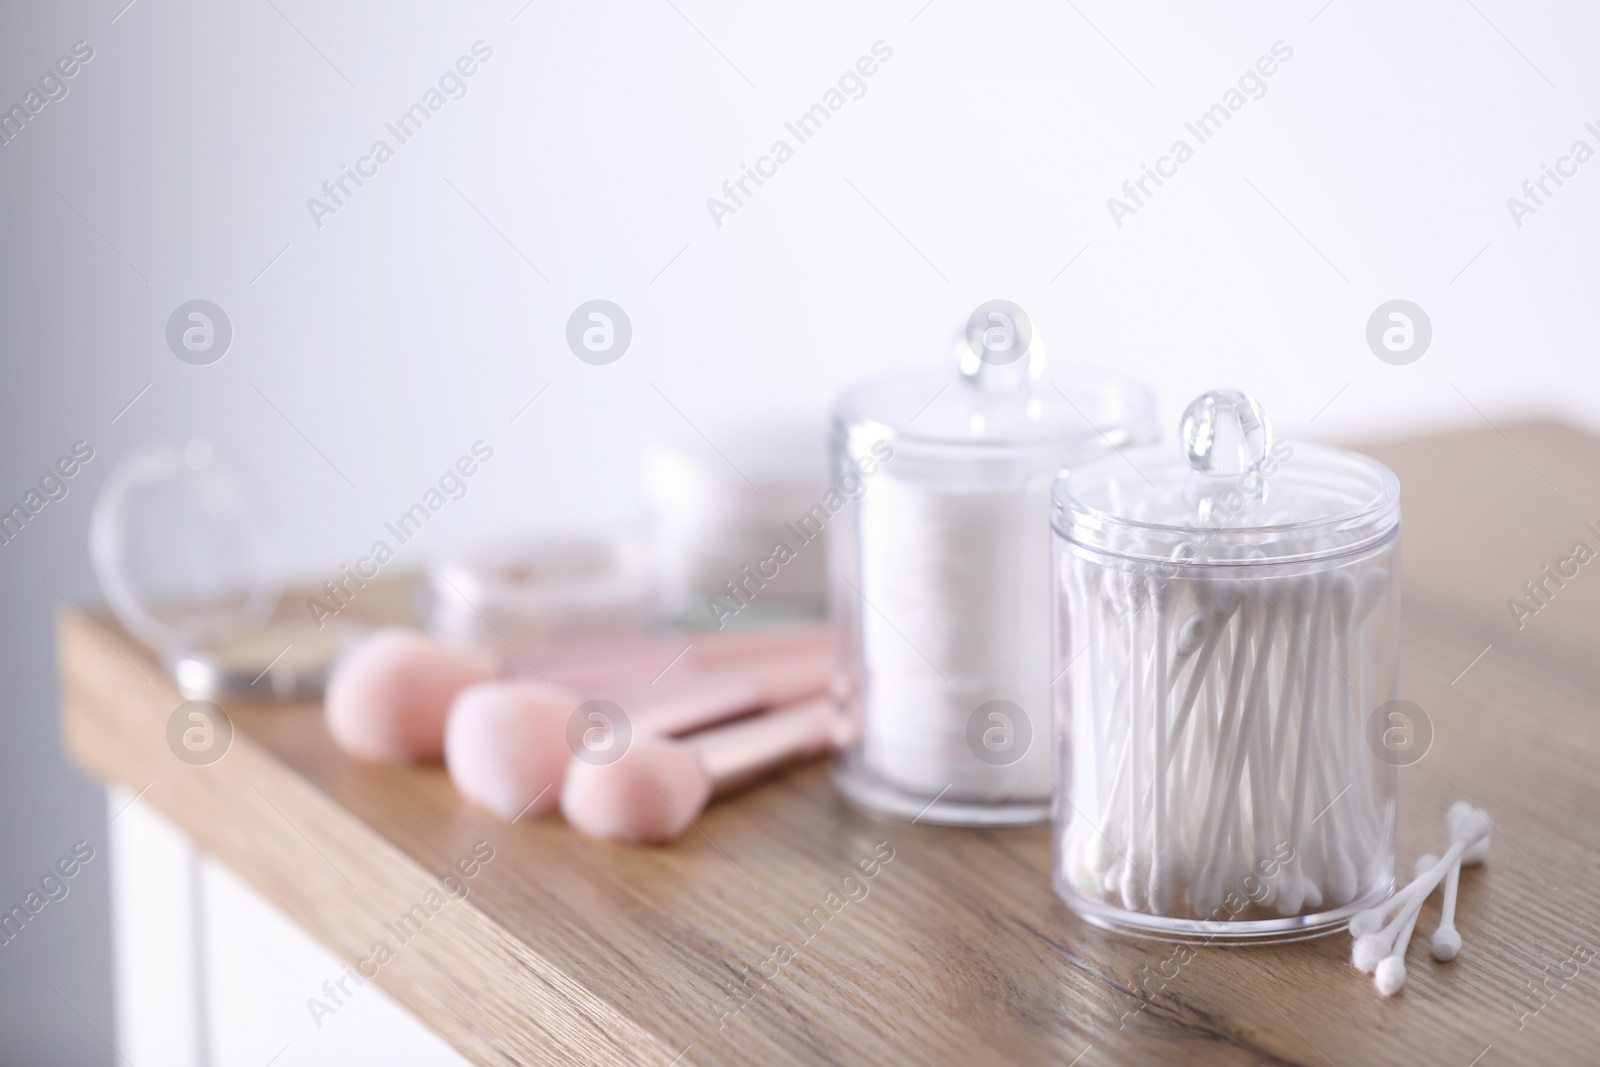 Photo of Cotton buds and pads in transparent holders on wooden table